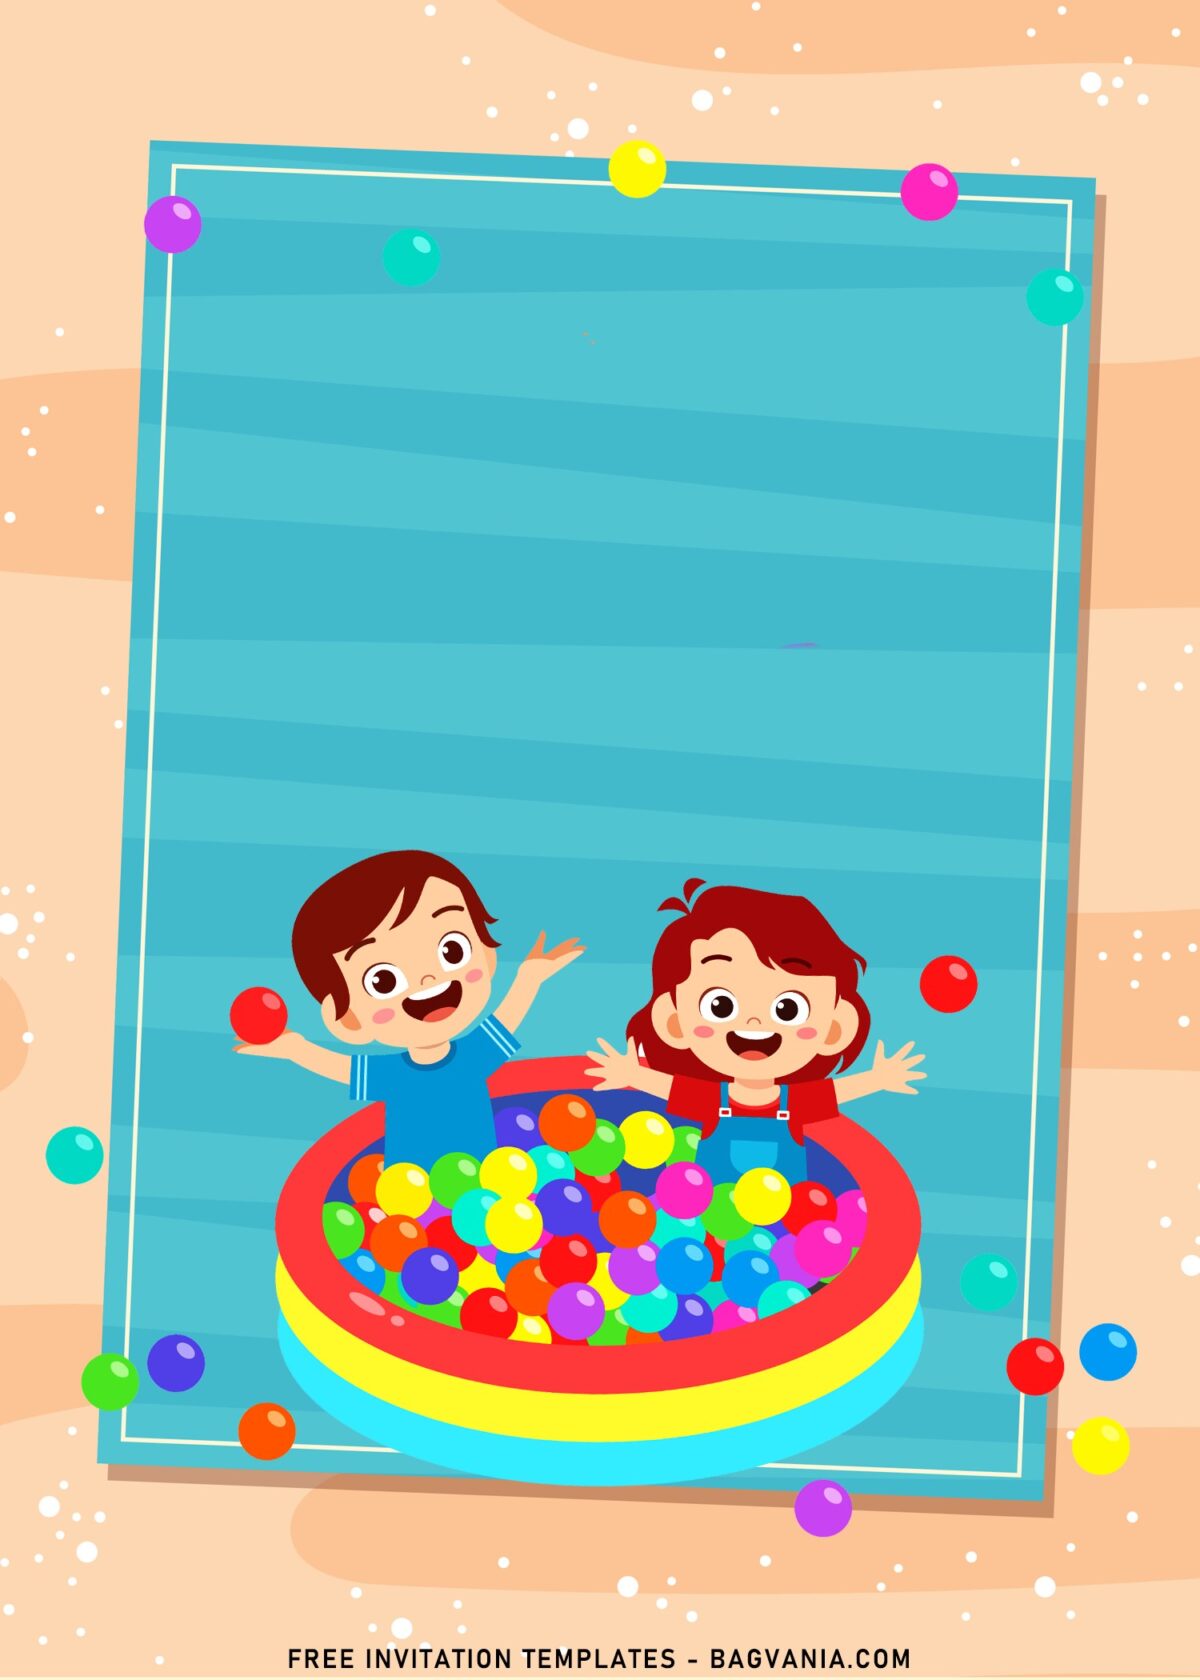 8+ Fun Summer Pool Kids Birthday Invitation Templates with cute kids on pool full of colorful balls